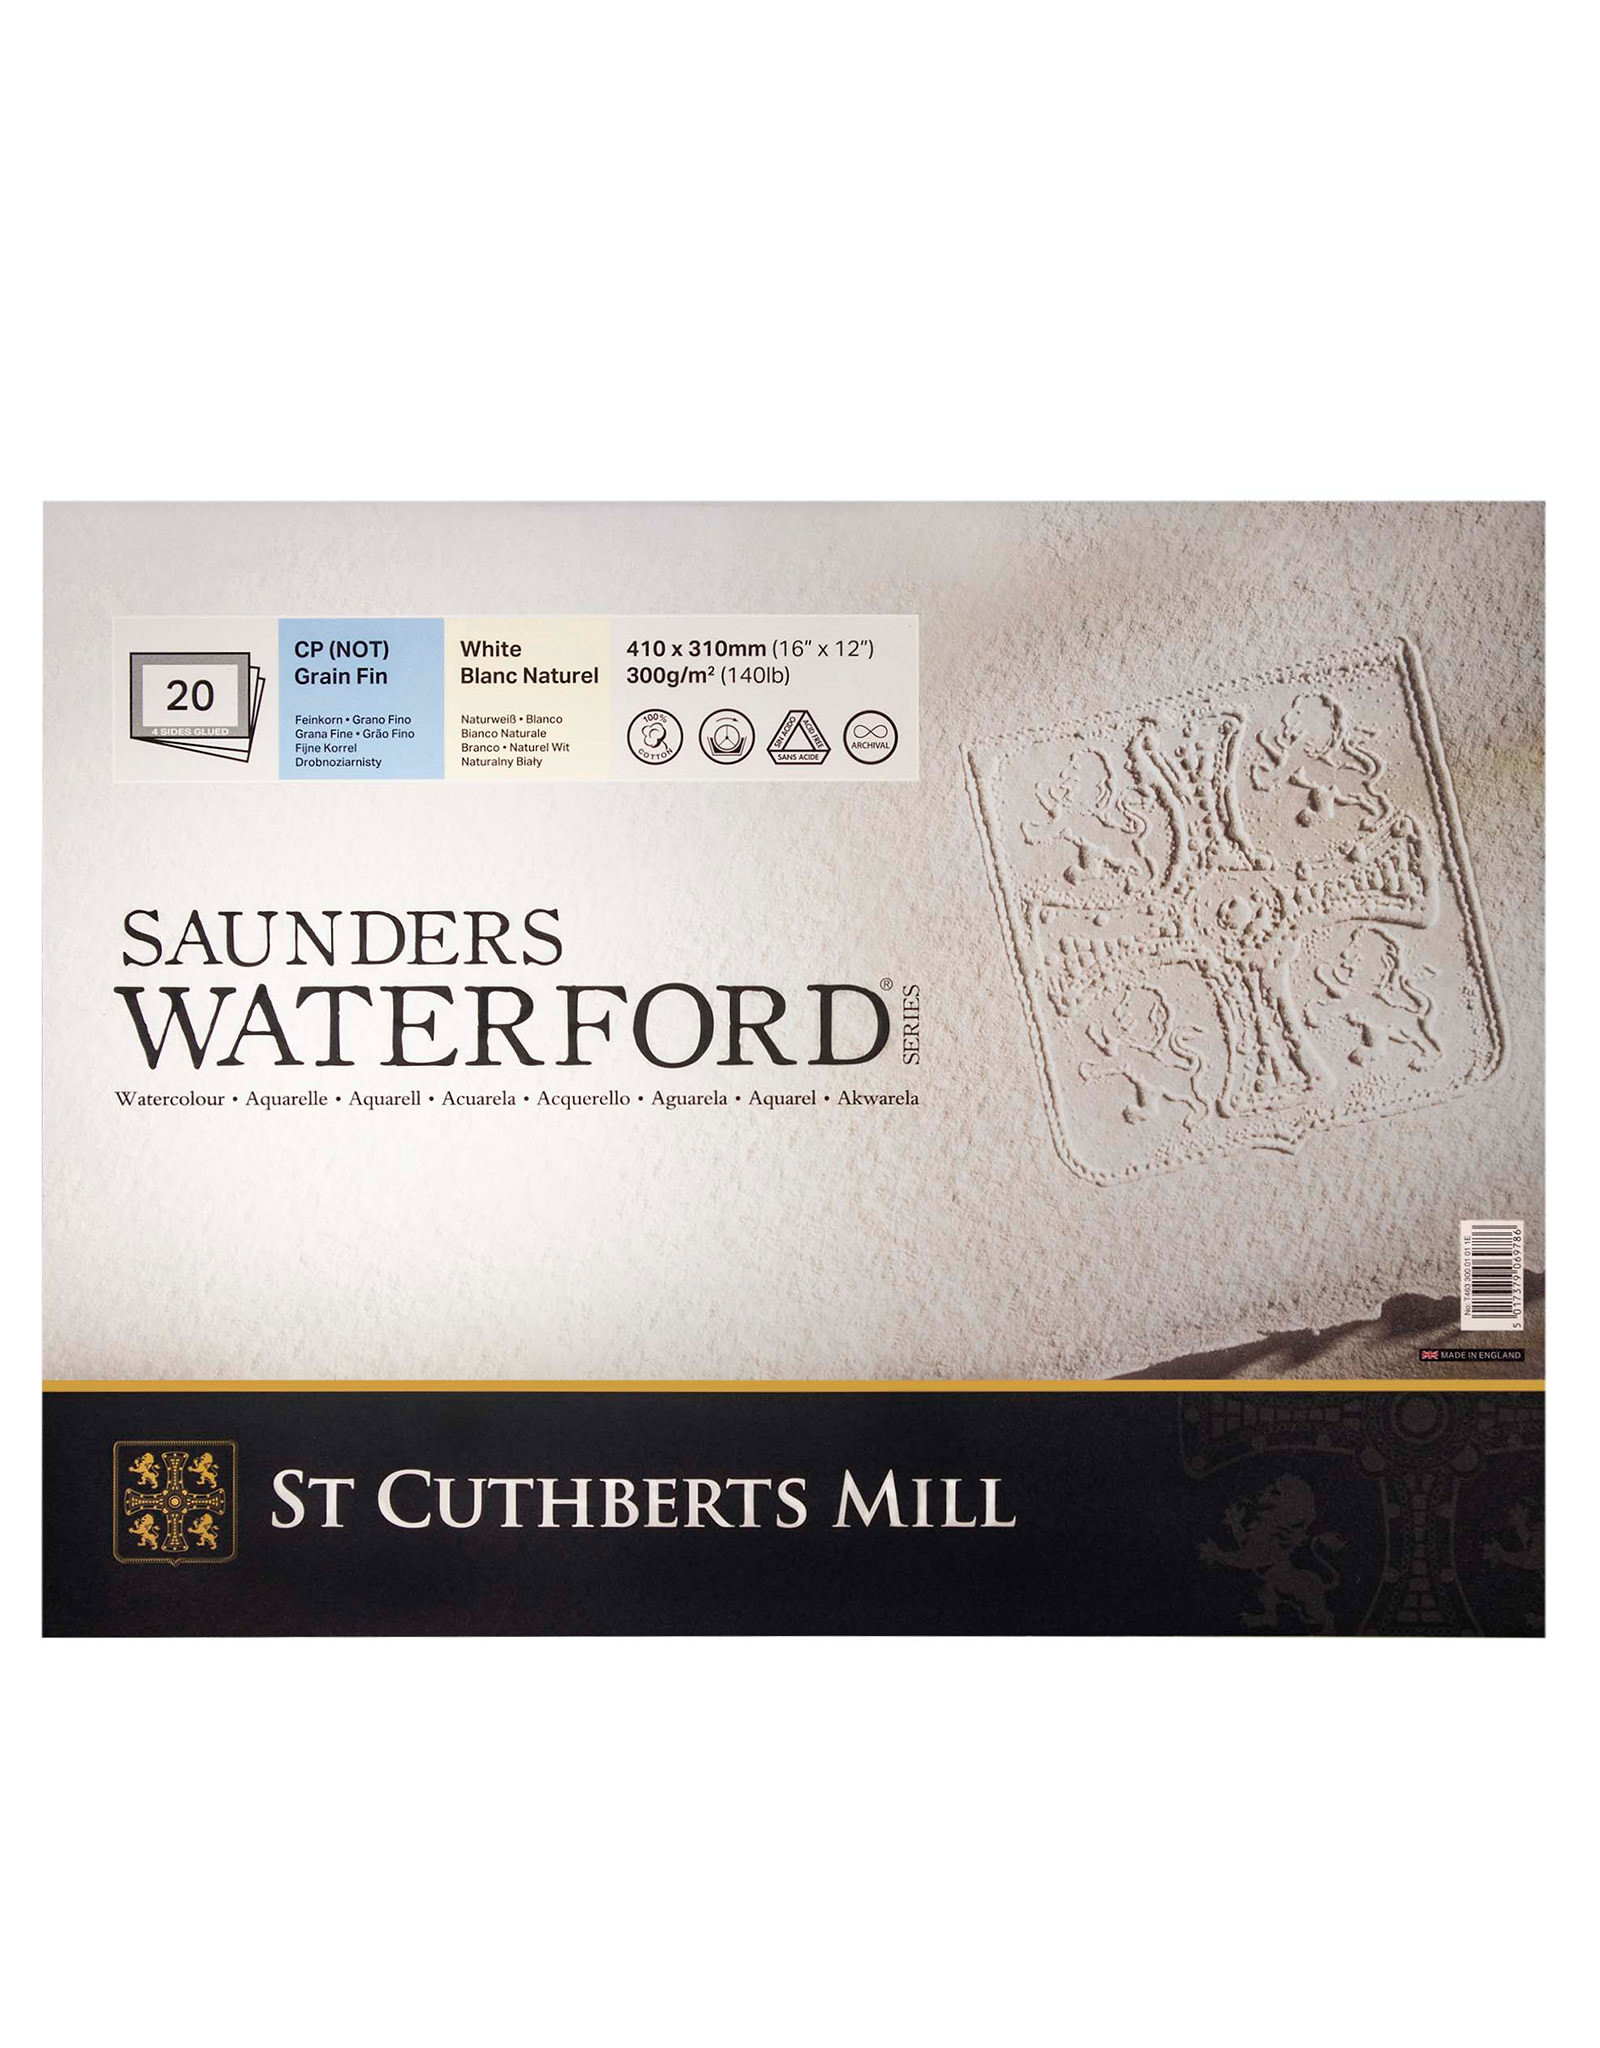 St.Cuthberts Saunders Waterford Cold-Press Block, 16” x 12”, Natural White